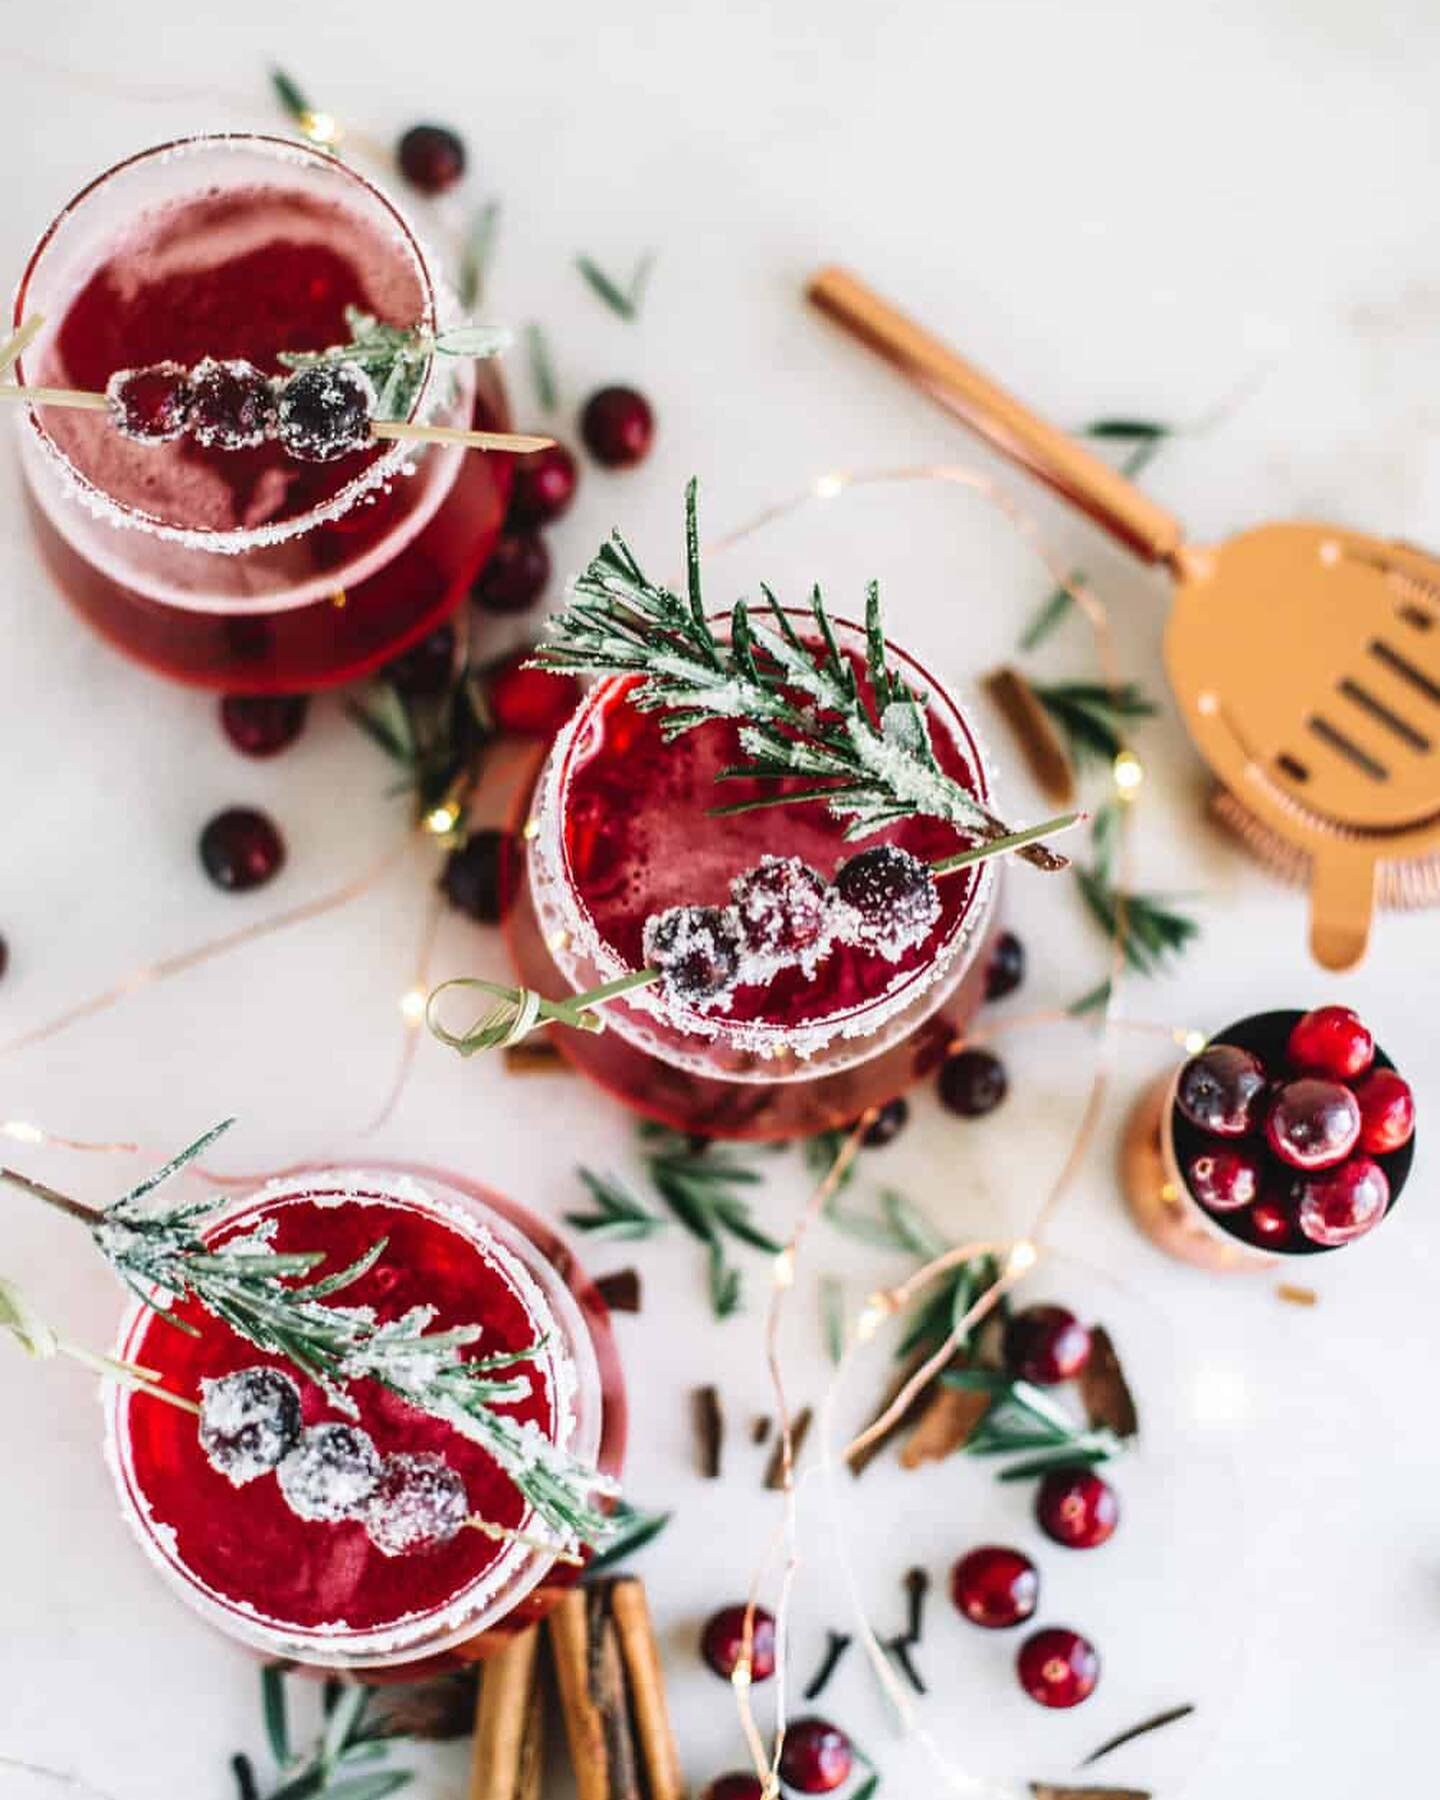 December means Christmas cocktails!🤶🏽🎄🥃Add &ldquo;Mrs. Claus&rsquo; Cranberry Whisky Cocktail&rdquo; to your repertoire: 

2 Ounces of Cranberry Juice
2 Ounces of Shinju
1-2 Tbsp. of Rosemary Simple Syrup
1 Cinnamon Stick or 1/4 tsp. Ground Cinna